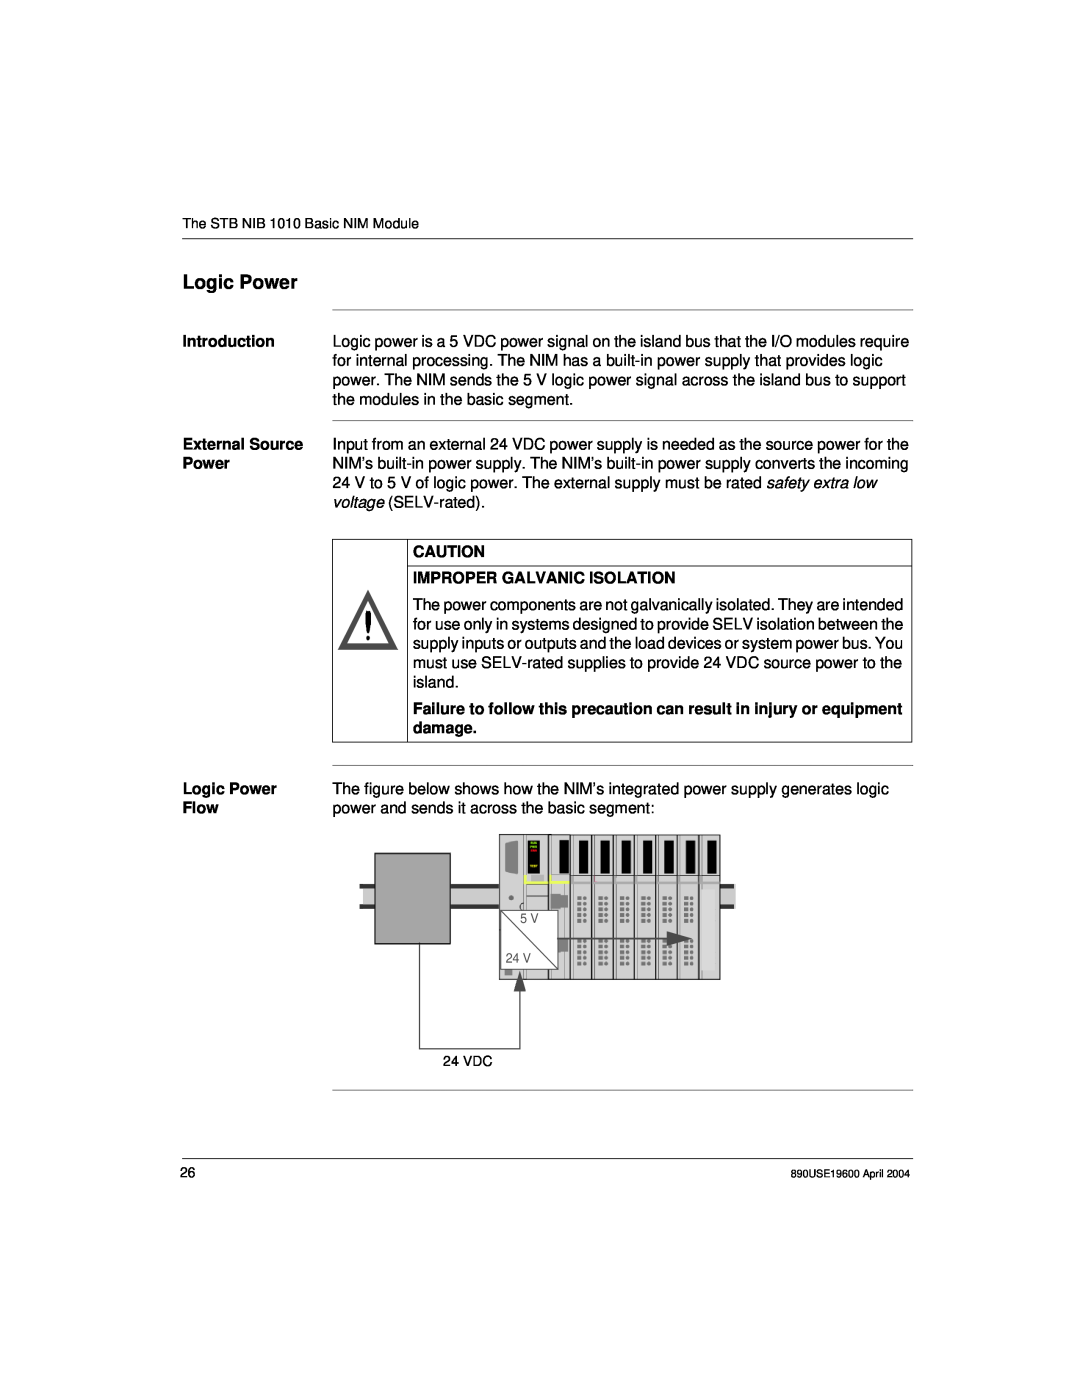 Schneider Electric 890USE19600 Version 1.0 manual Logic Power, the modules in the basic segment, voltage SELV-rated, island 